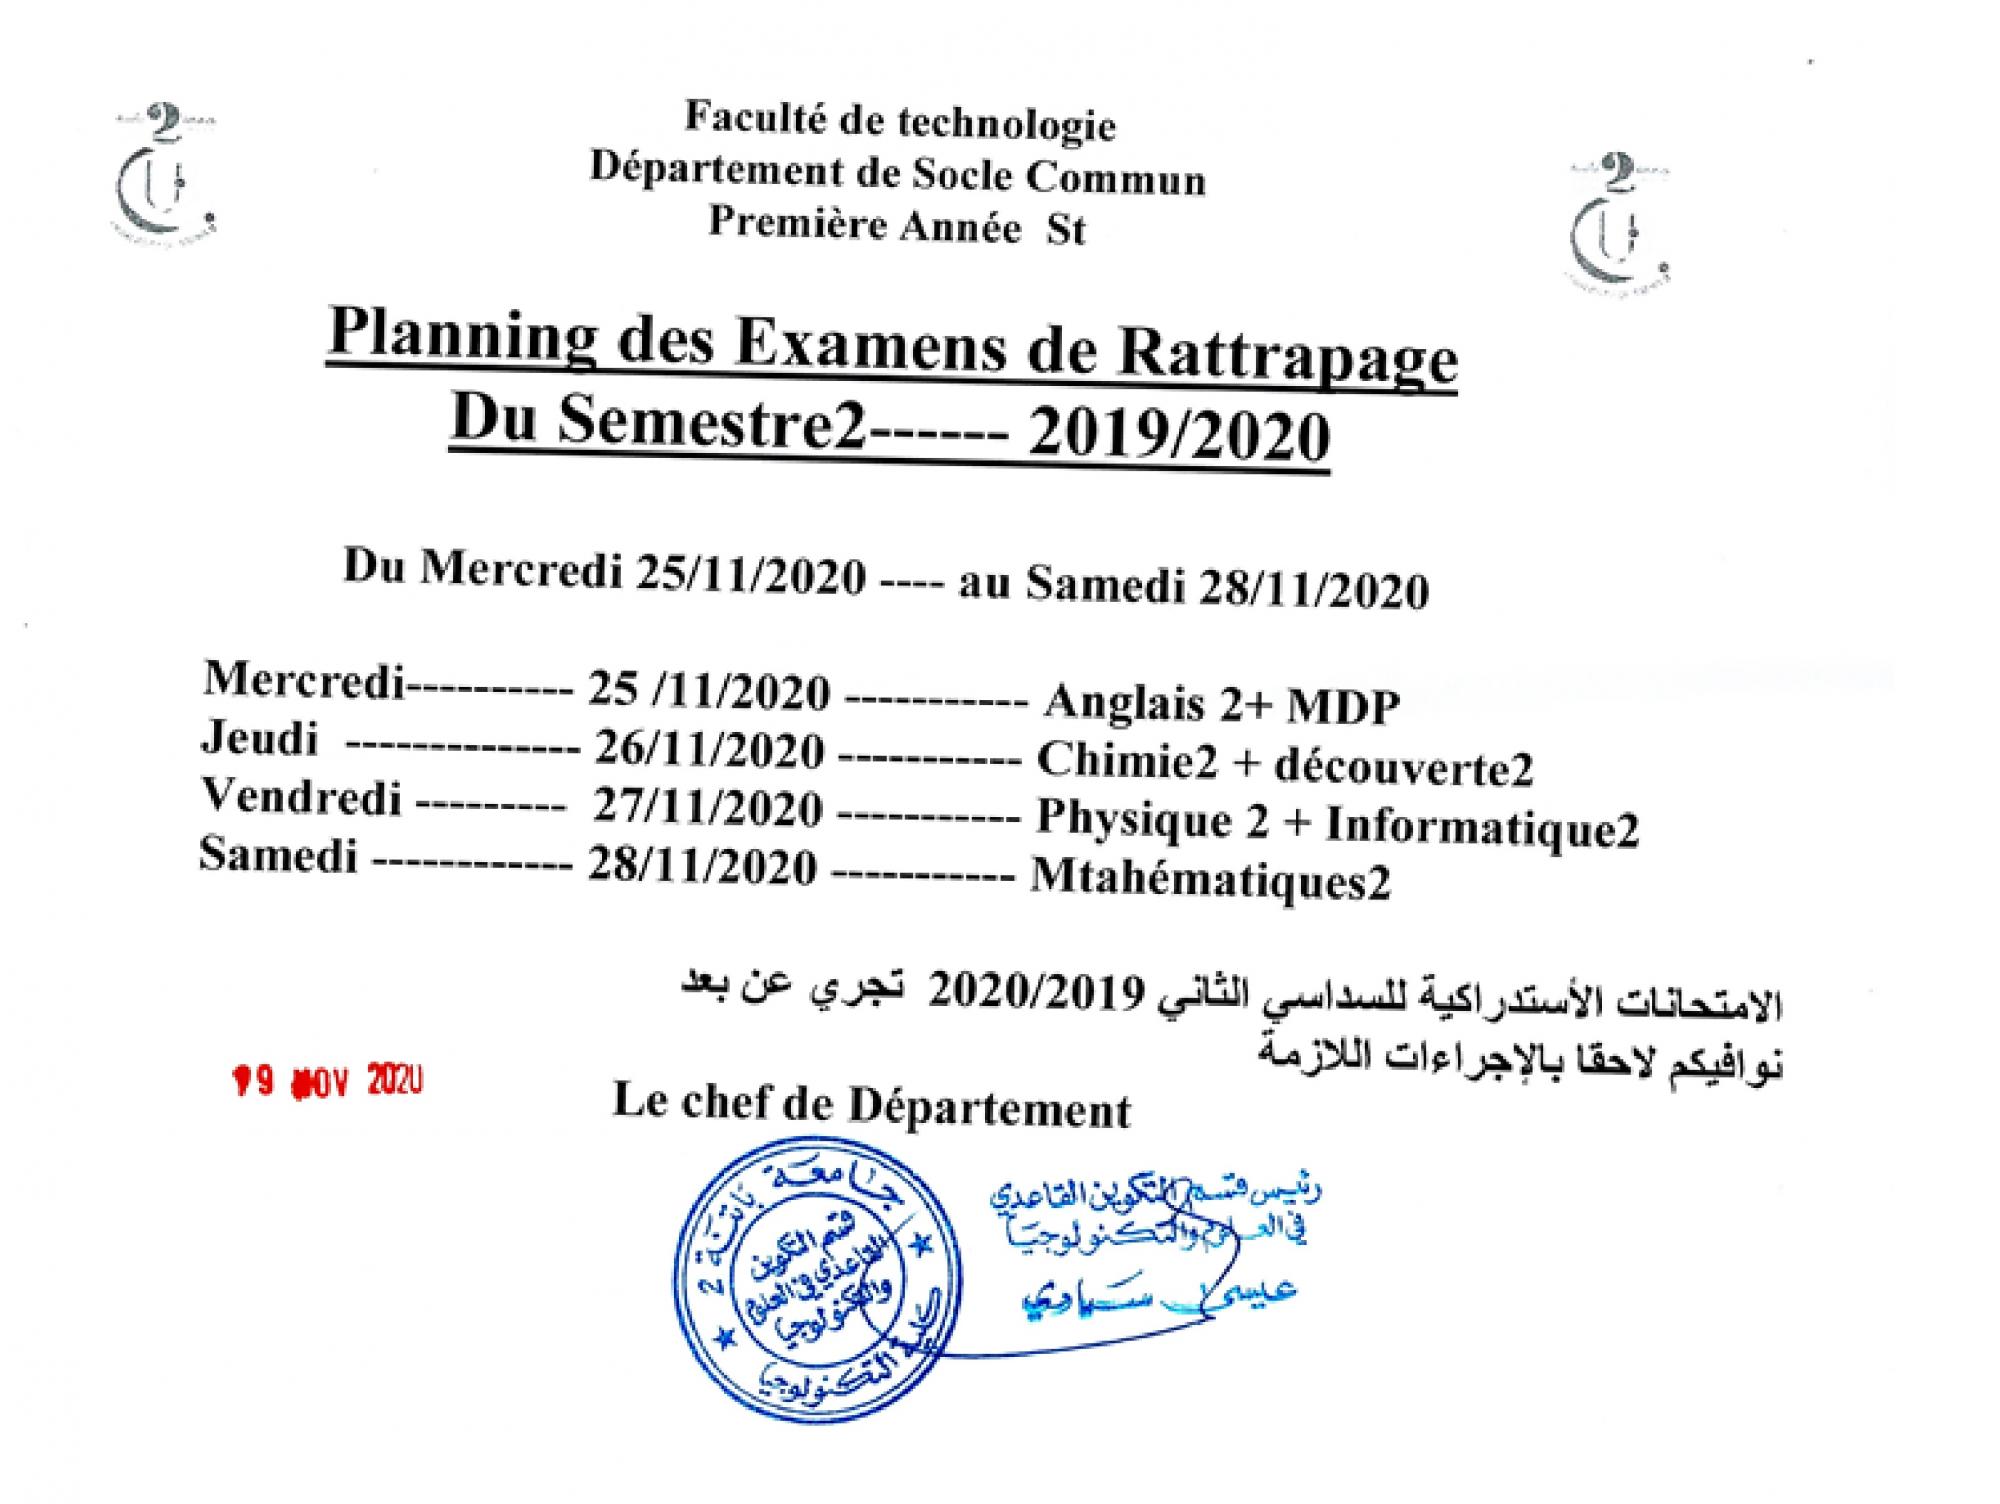 planning_exams_rattrapage_s2_2019-2020_1ere_annee